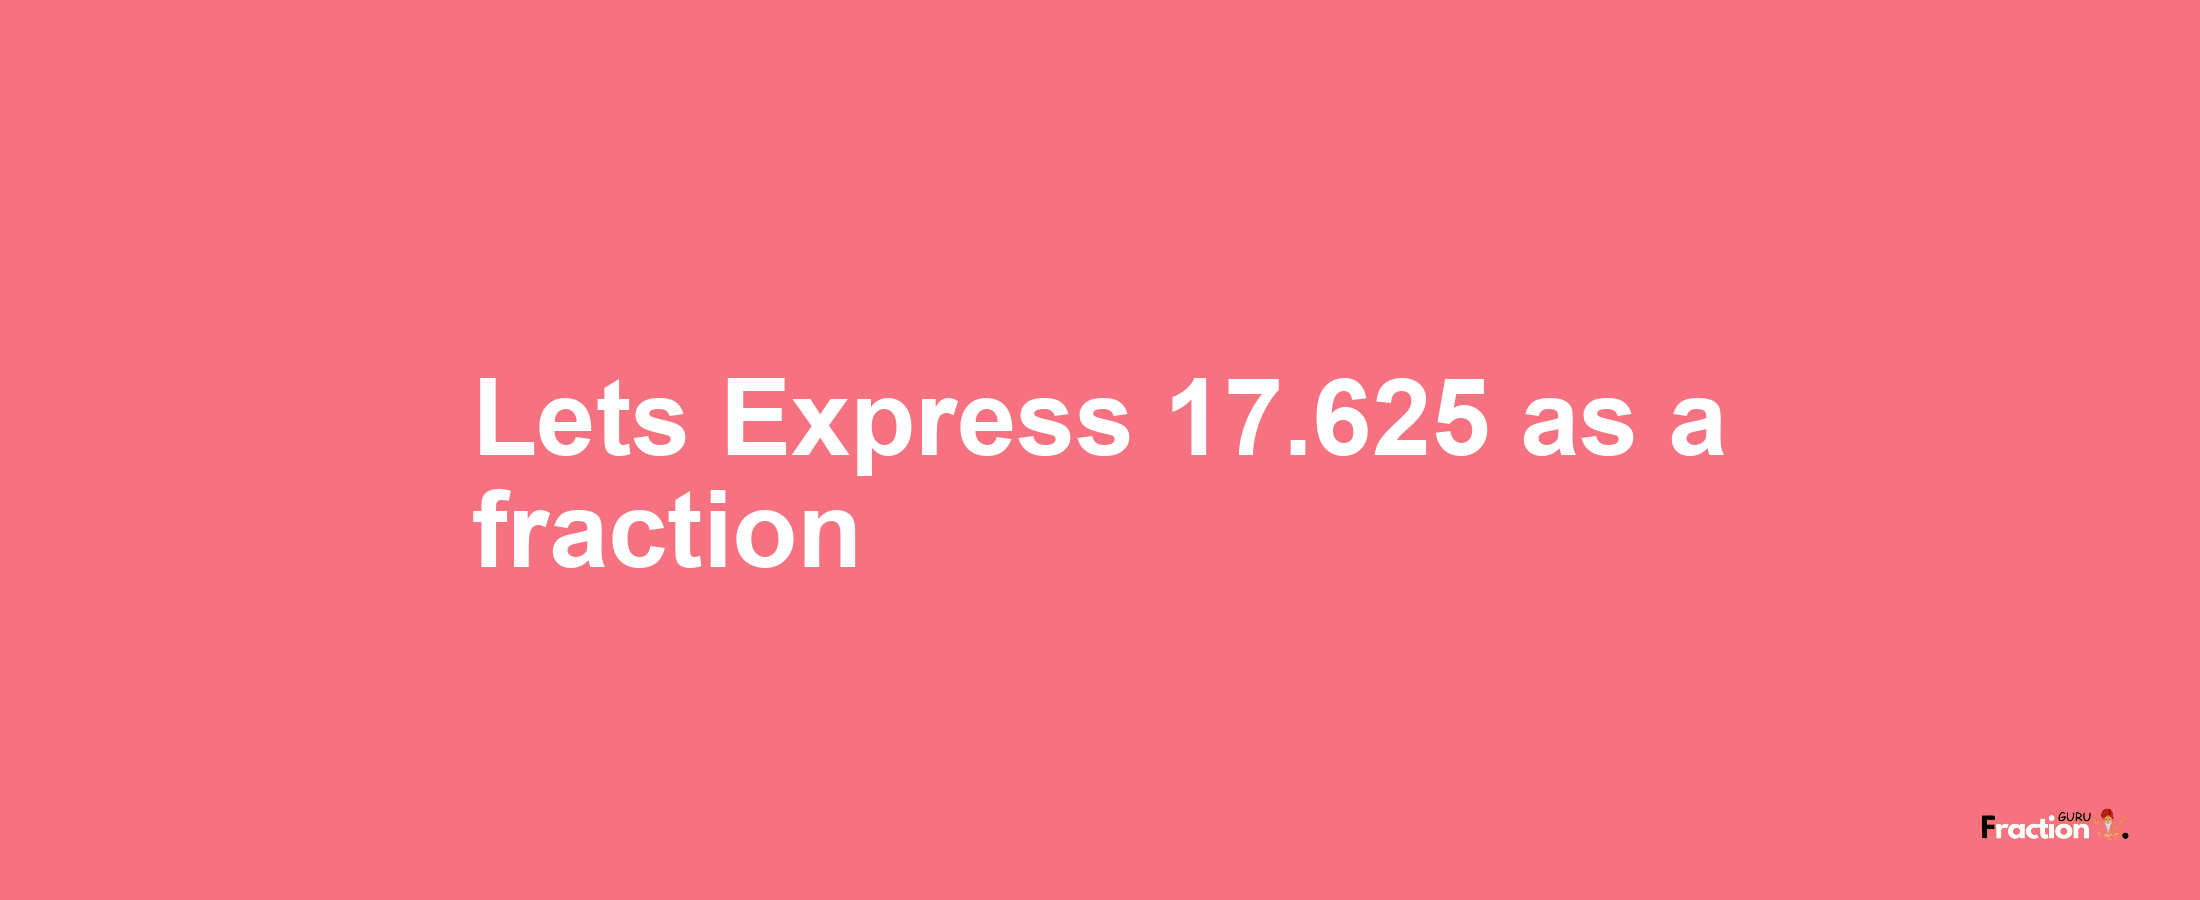 Lets Express 17.625 as afraction